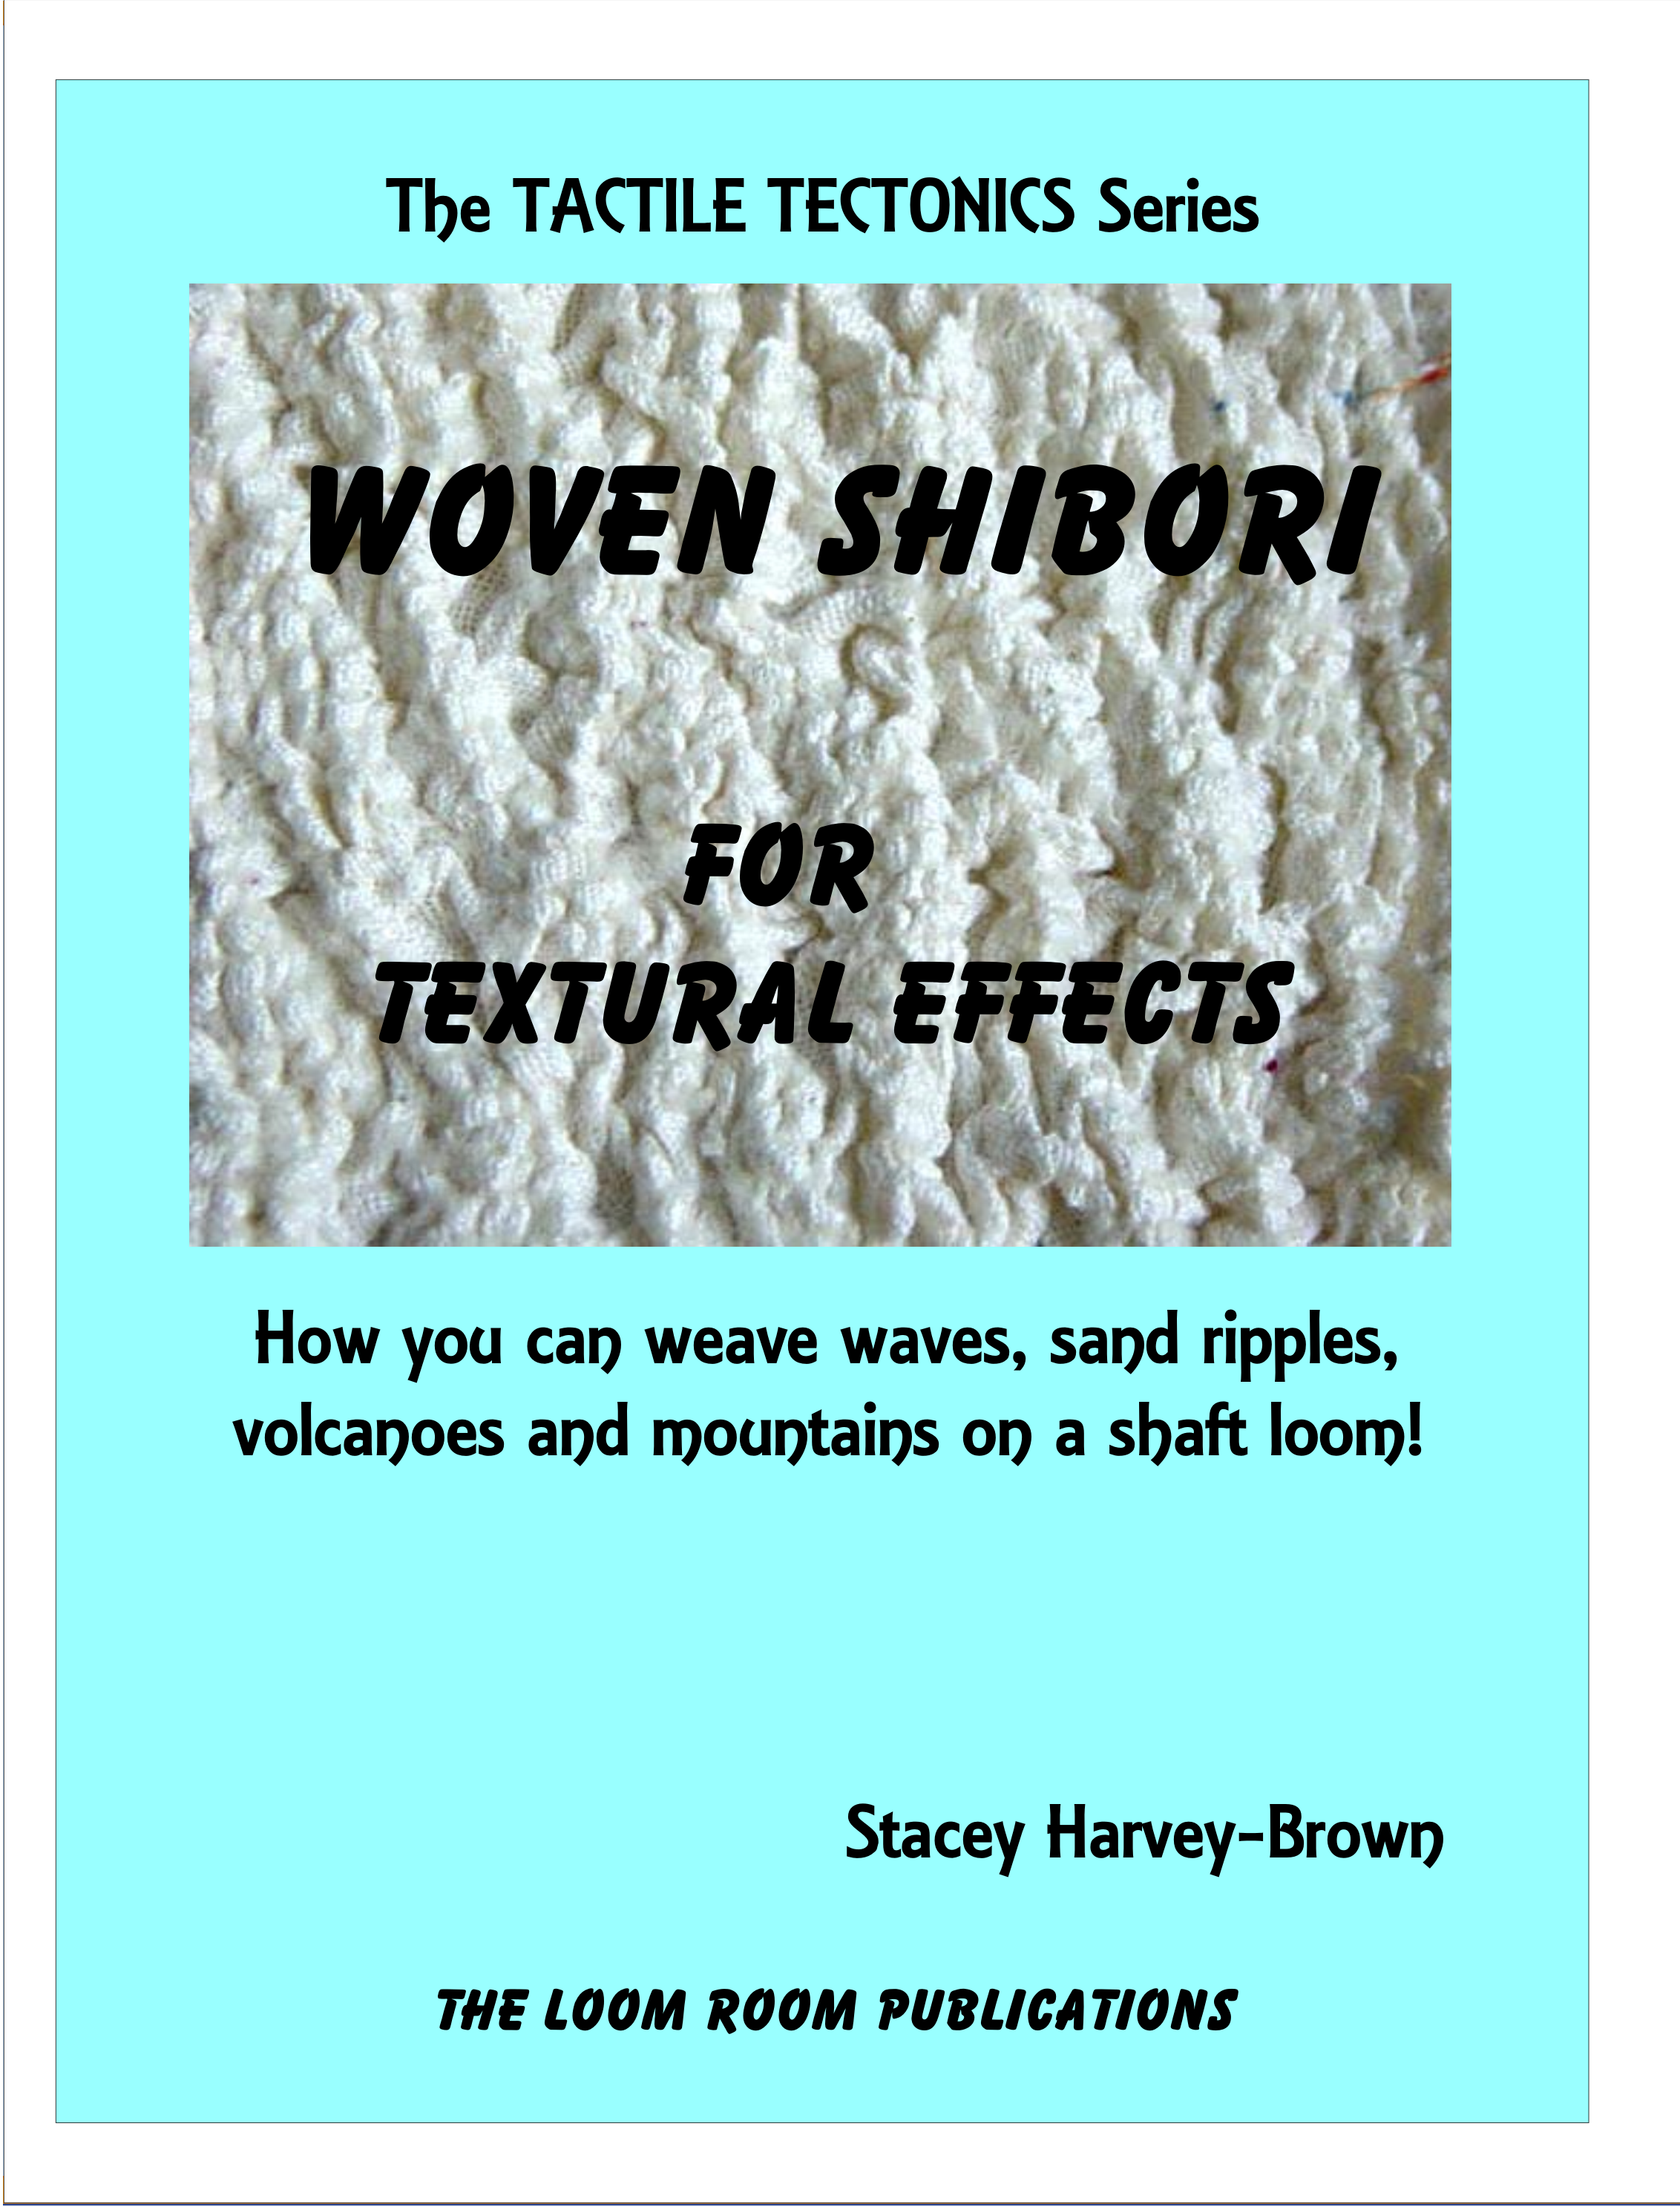 Woven Shibori for Textural Effects – pdf available now